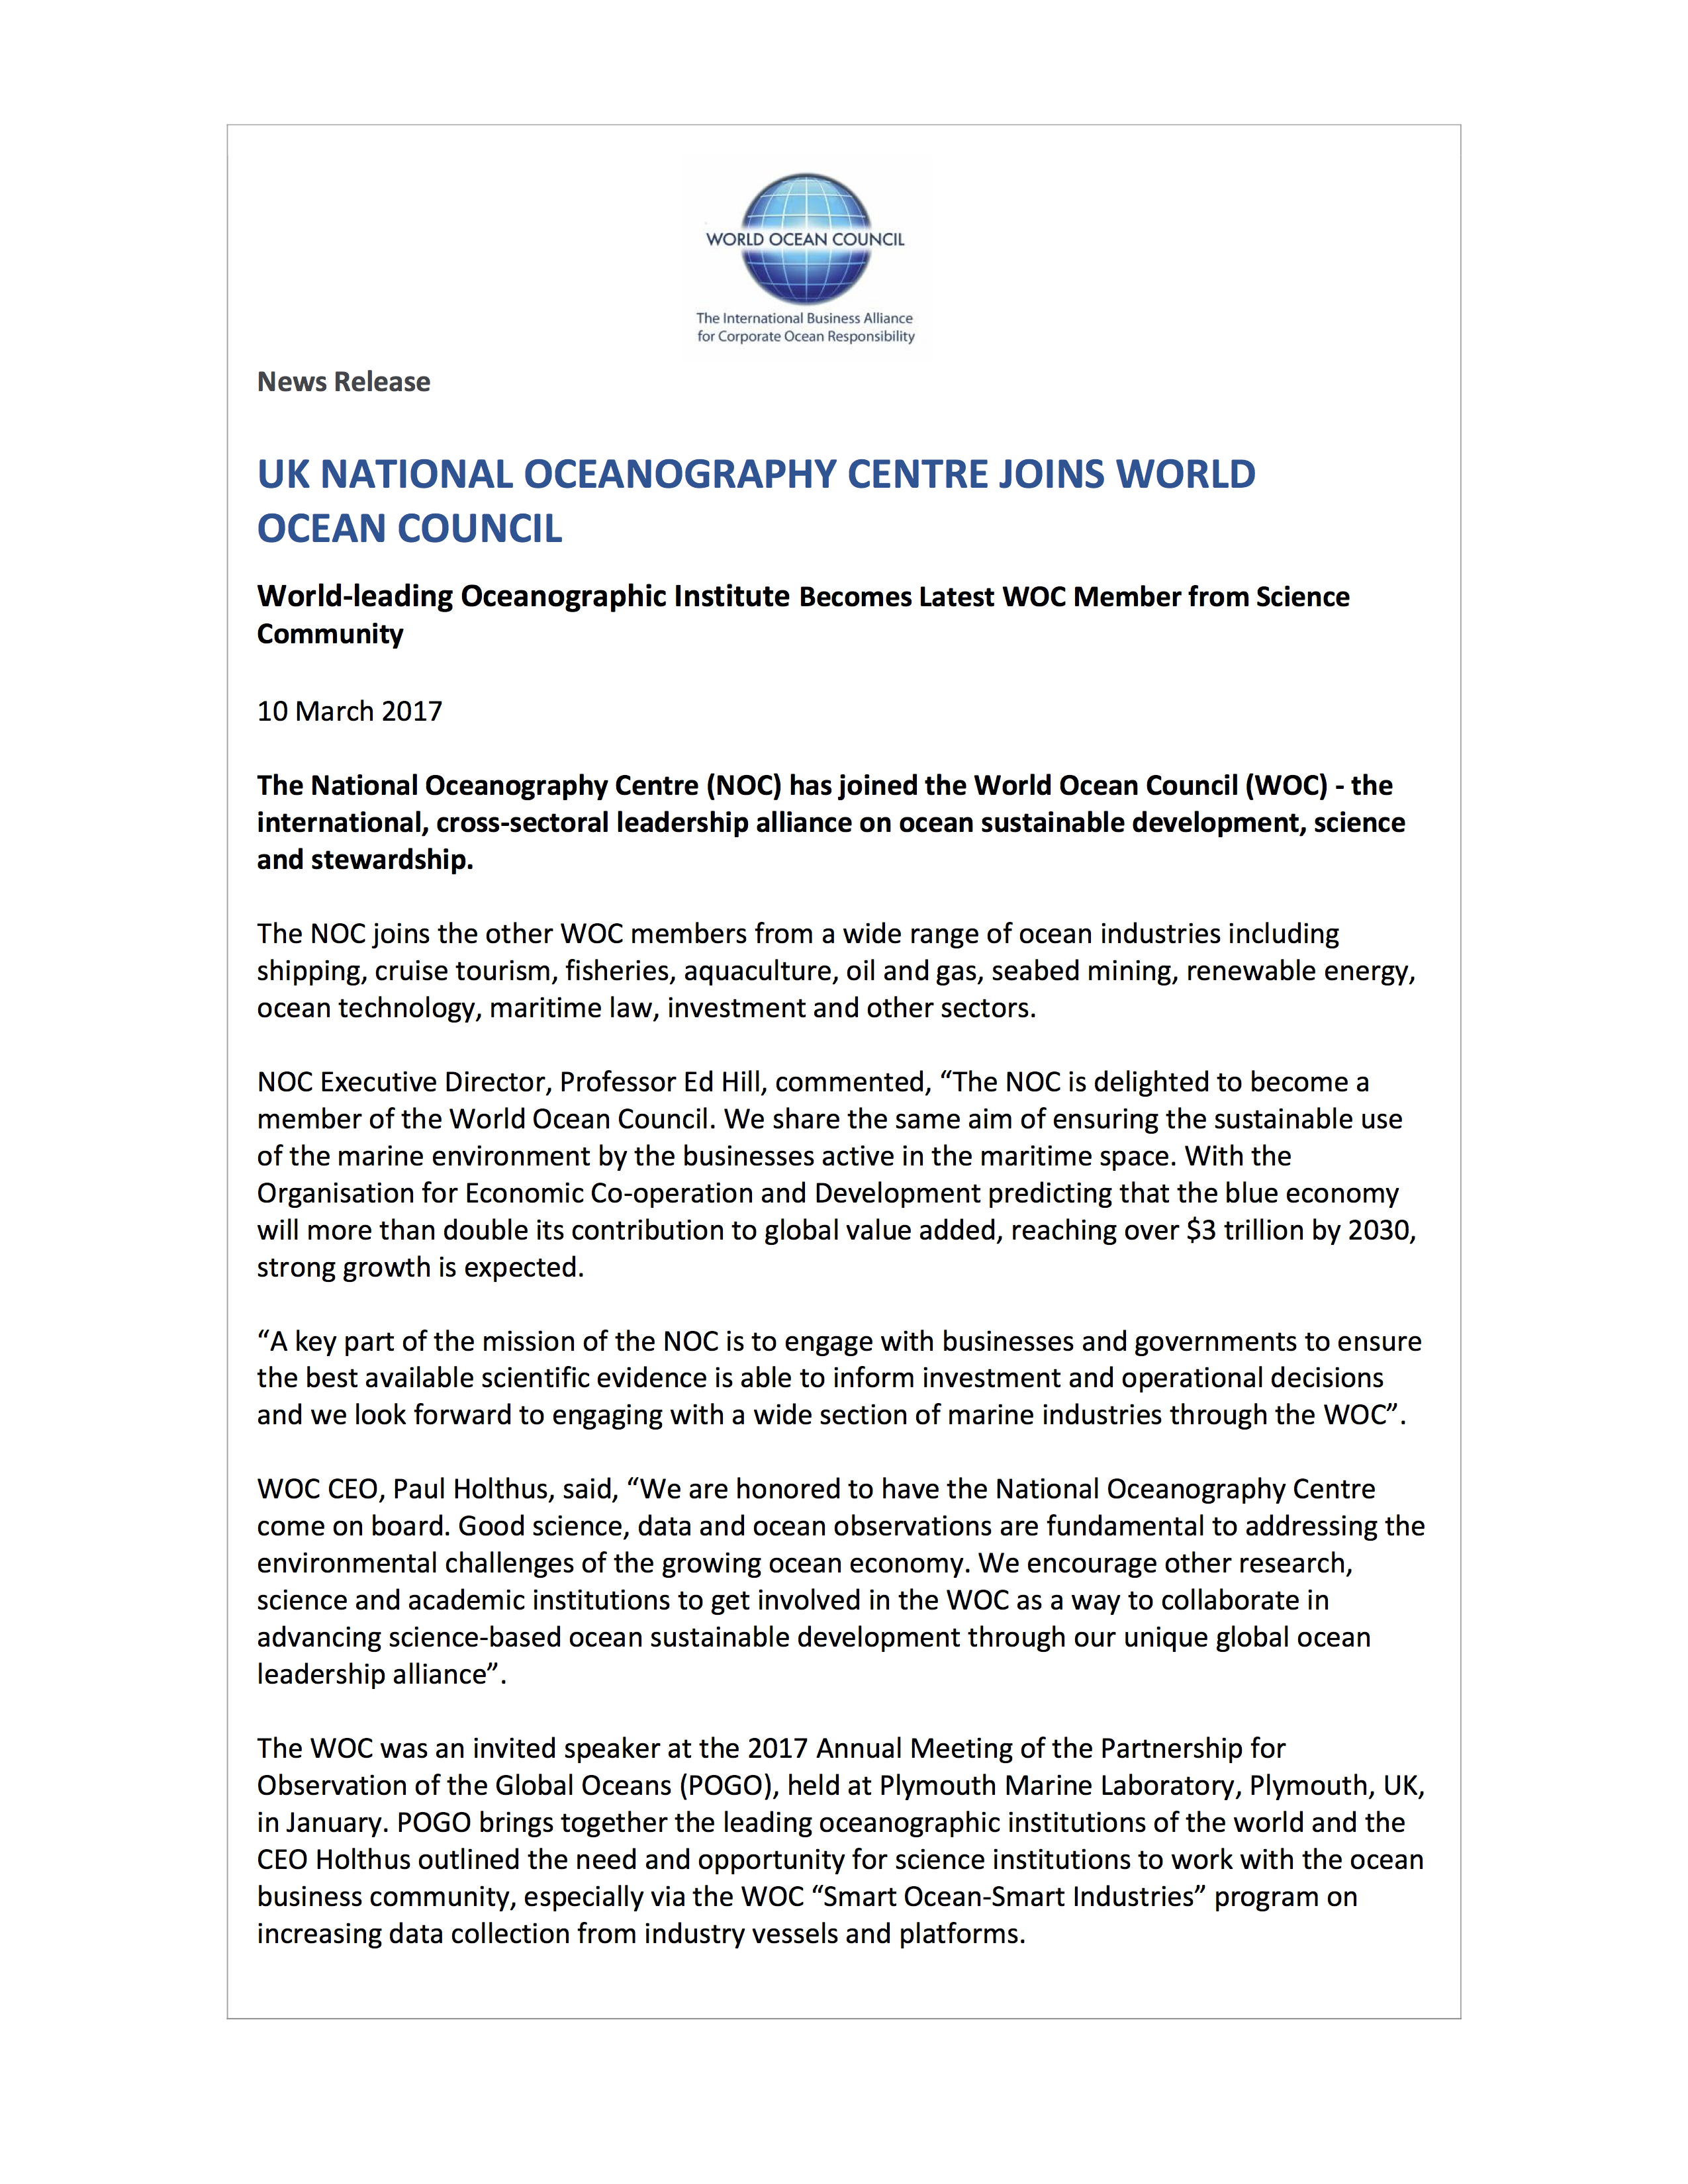 WOC News Release UK National Oceanography Centre Joins World Ocean Council